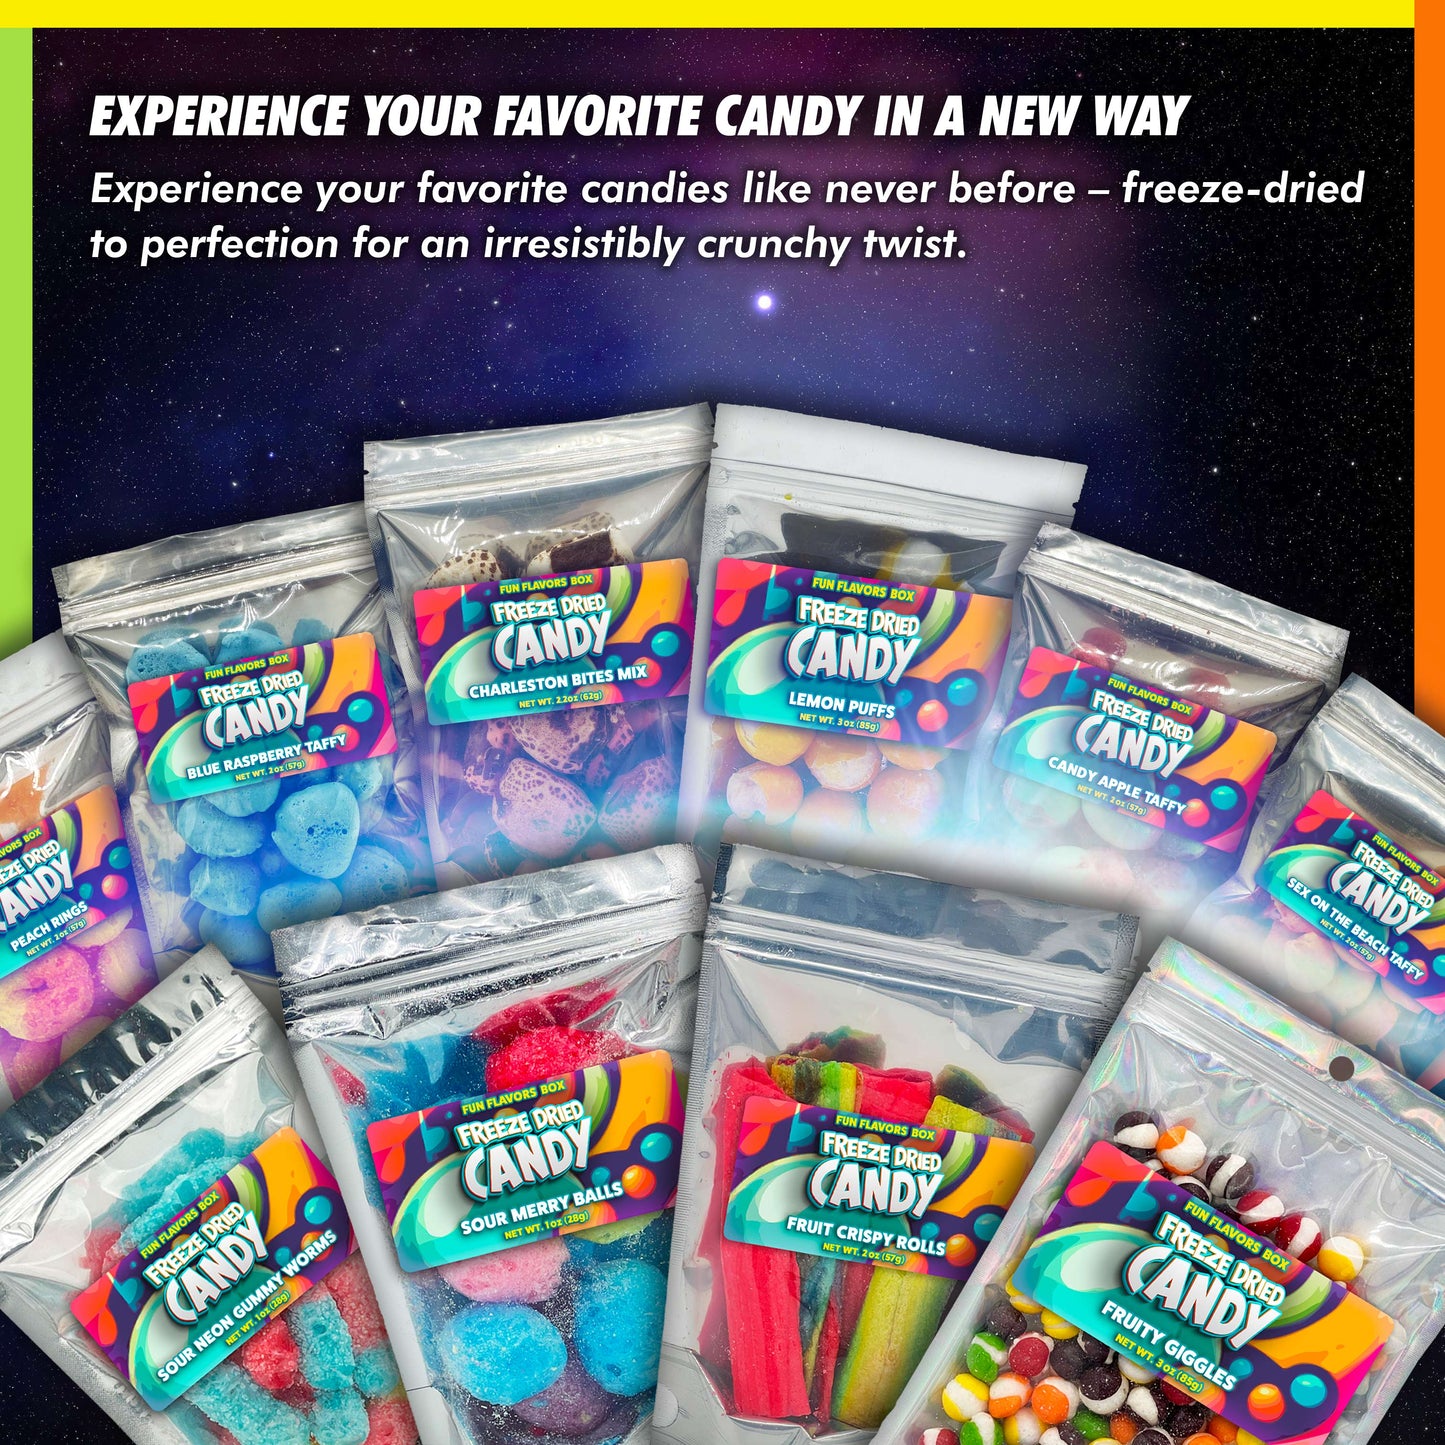 Freeze Dried Candy Giggles Variety Pack Crunch Treats 6 oz